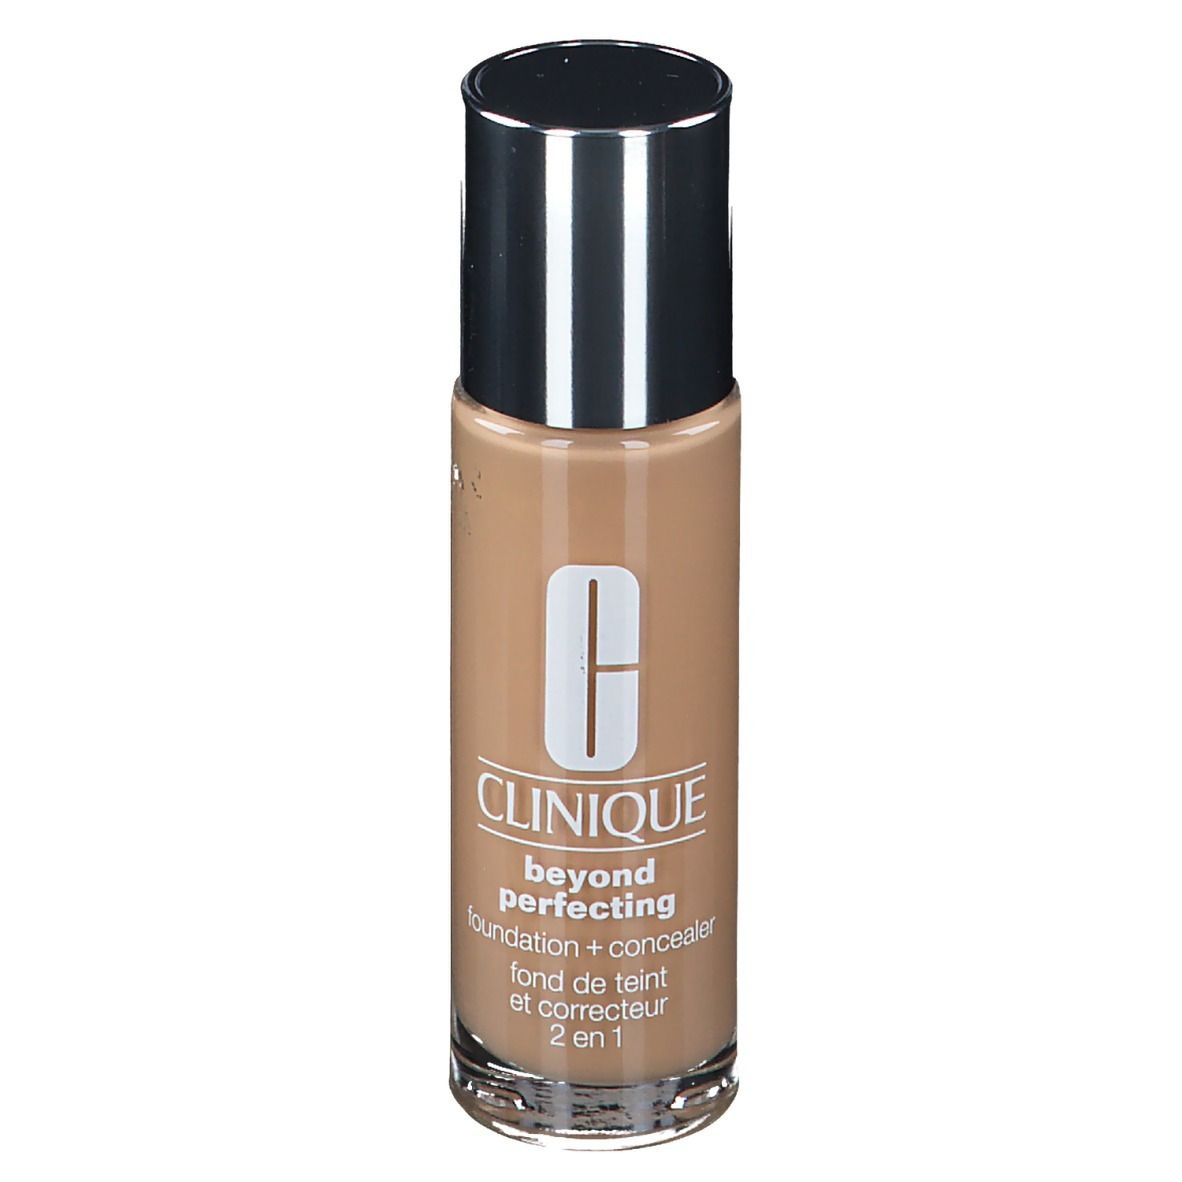 Clinique Beyond Perfecting Foundation and Concealer Neutral 09